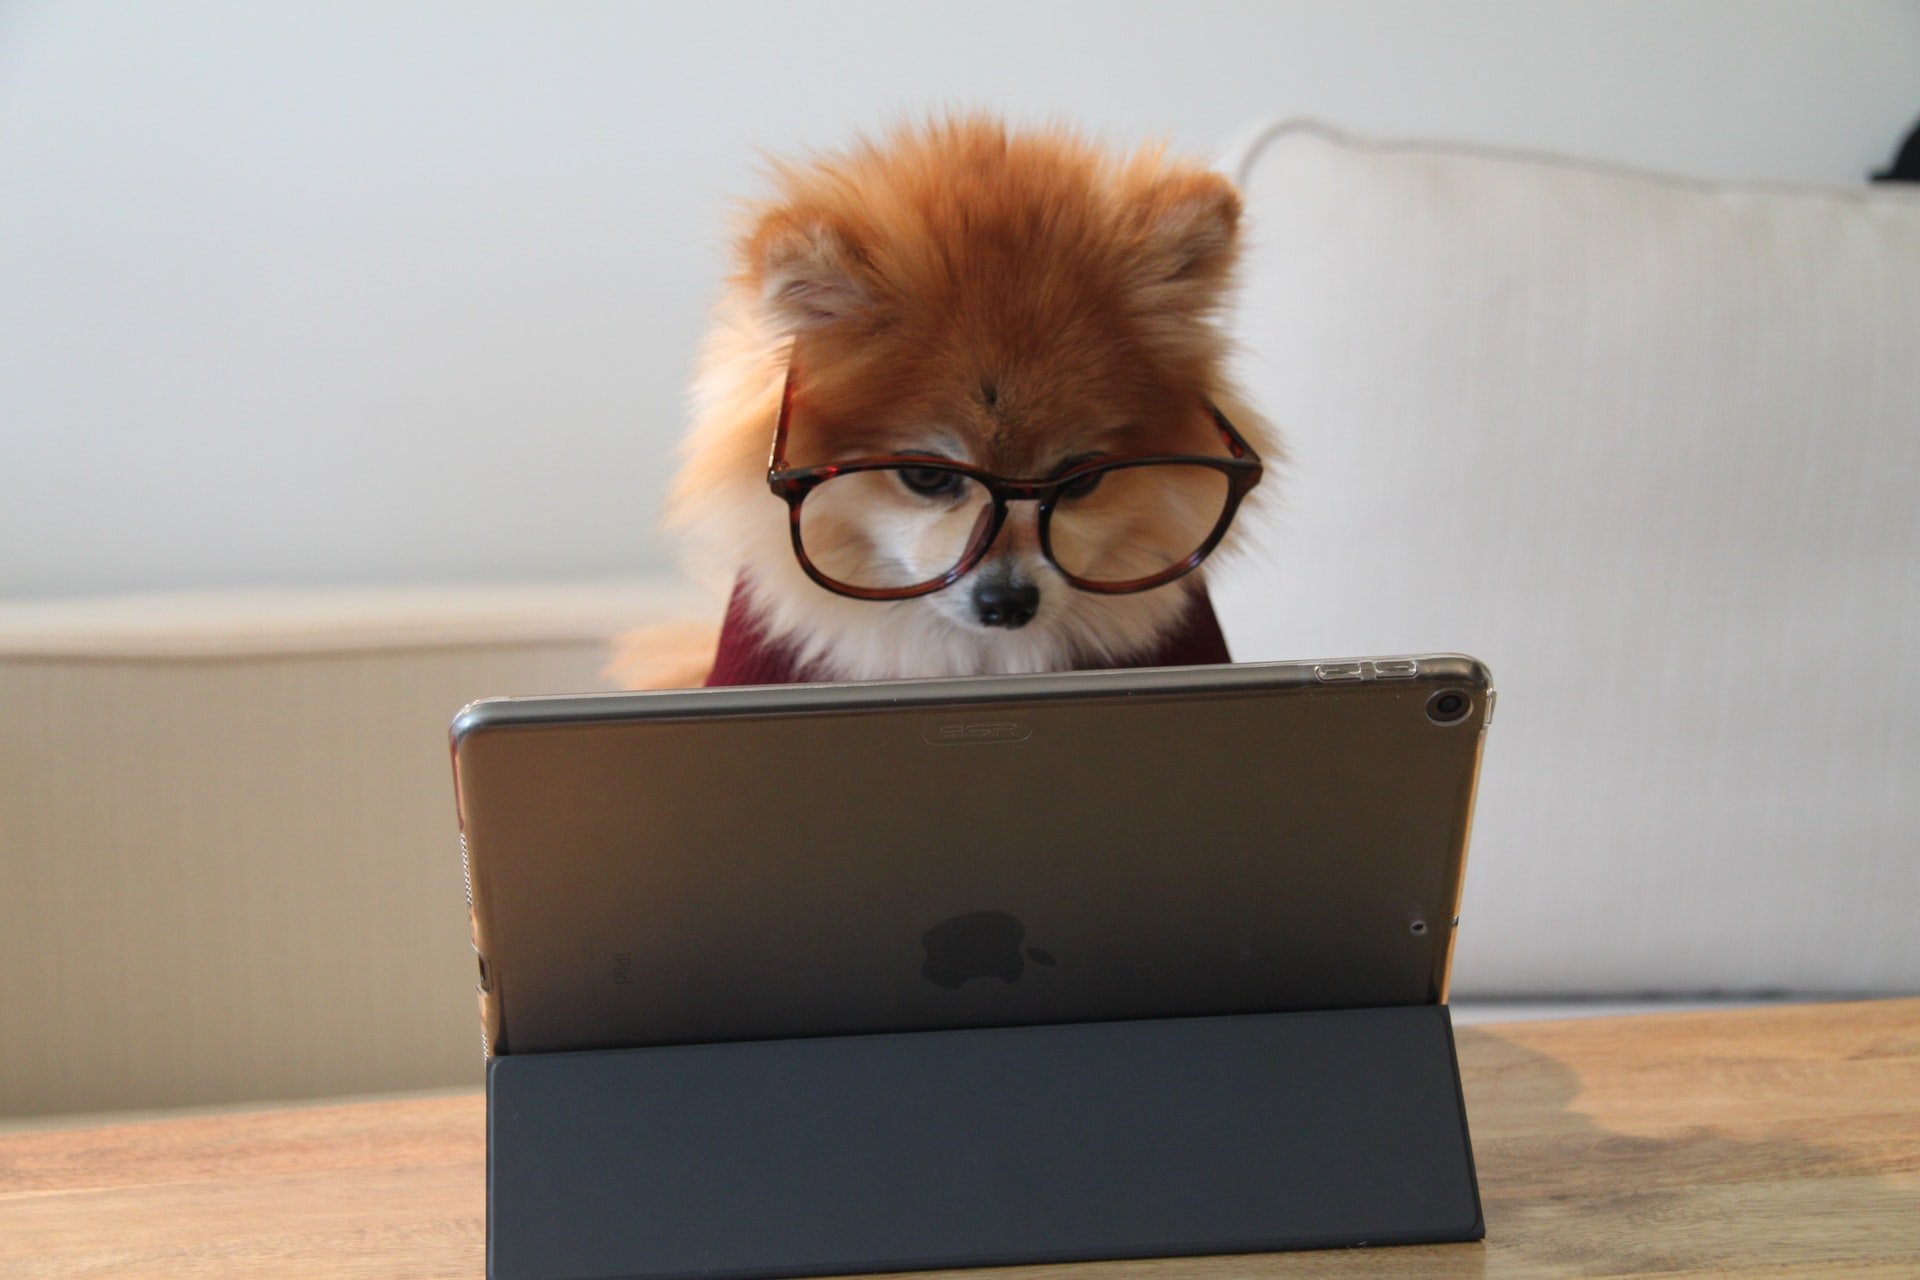 Dog searching for dog social networks on Apple tablet.